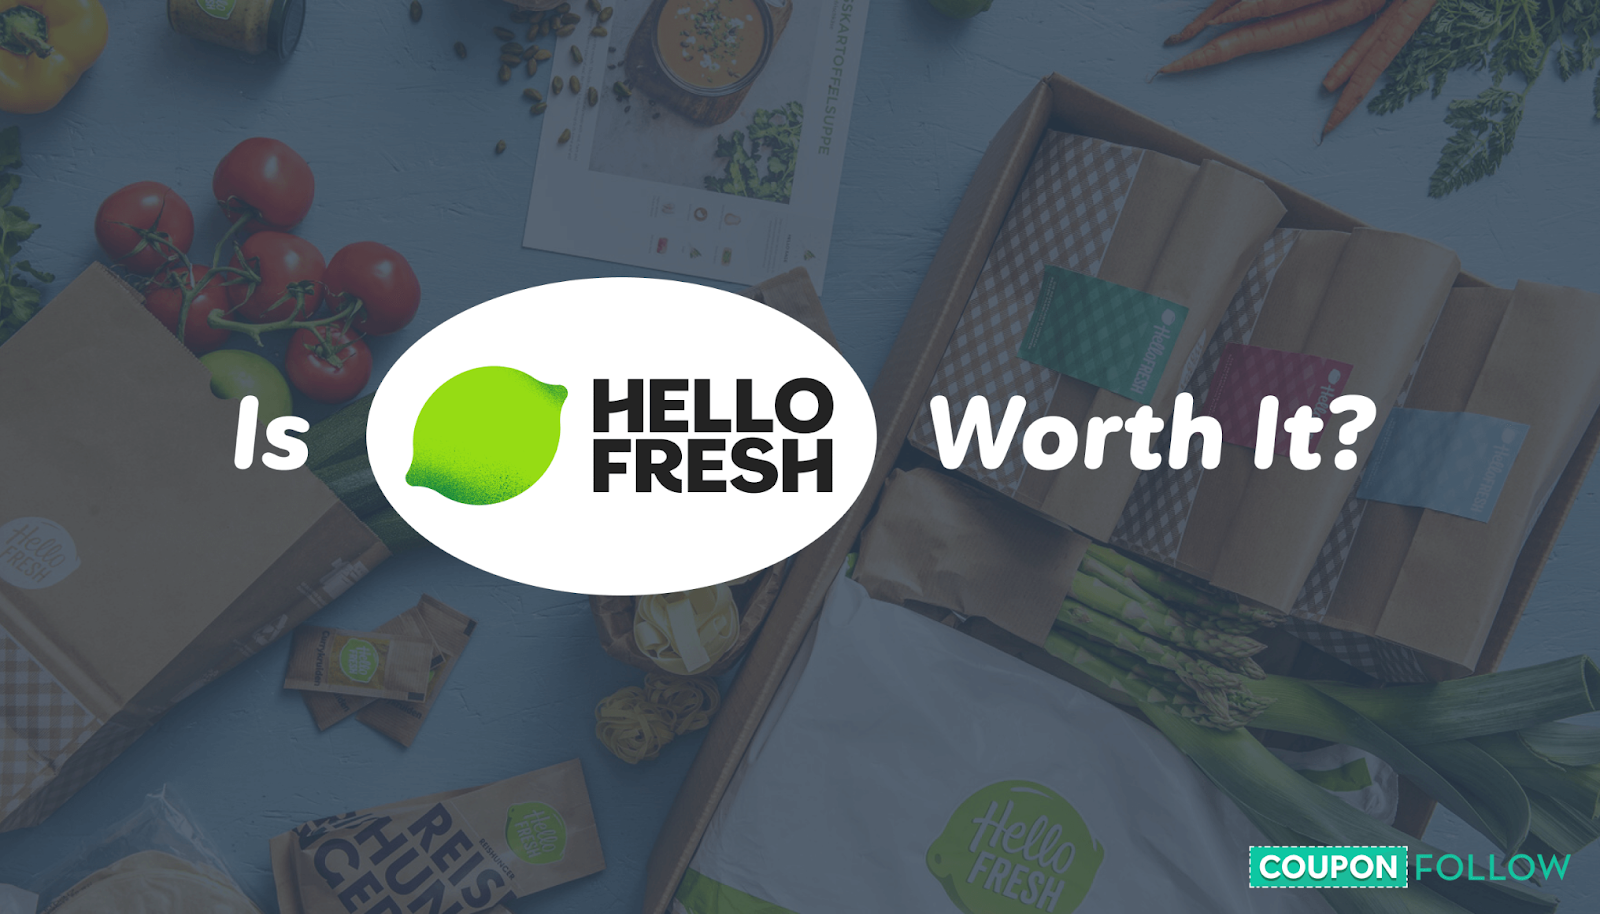  An image asking the question Is HelloFresh Worth it?